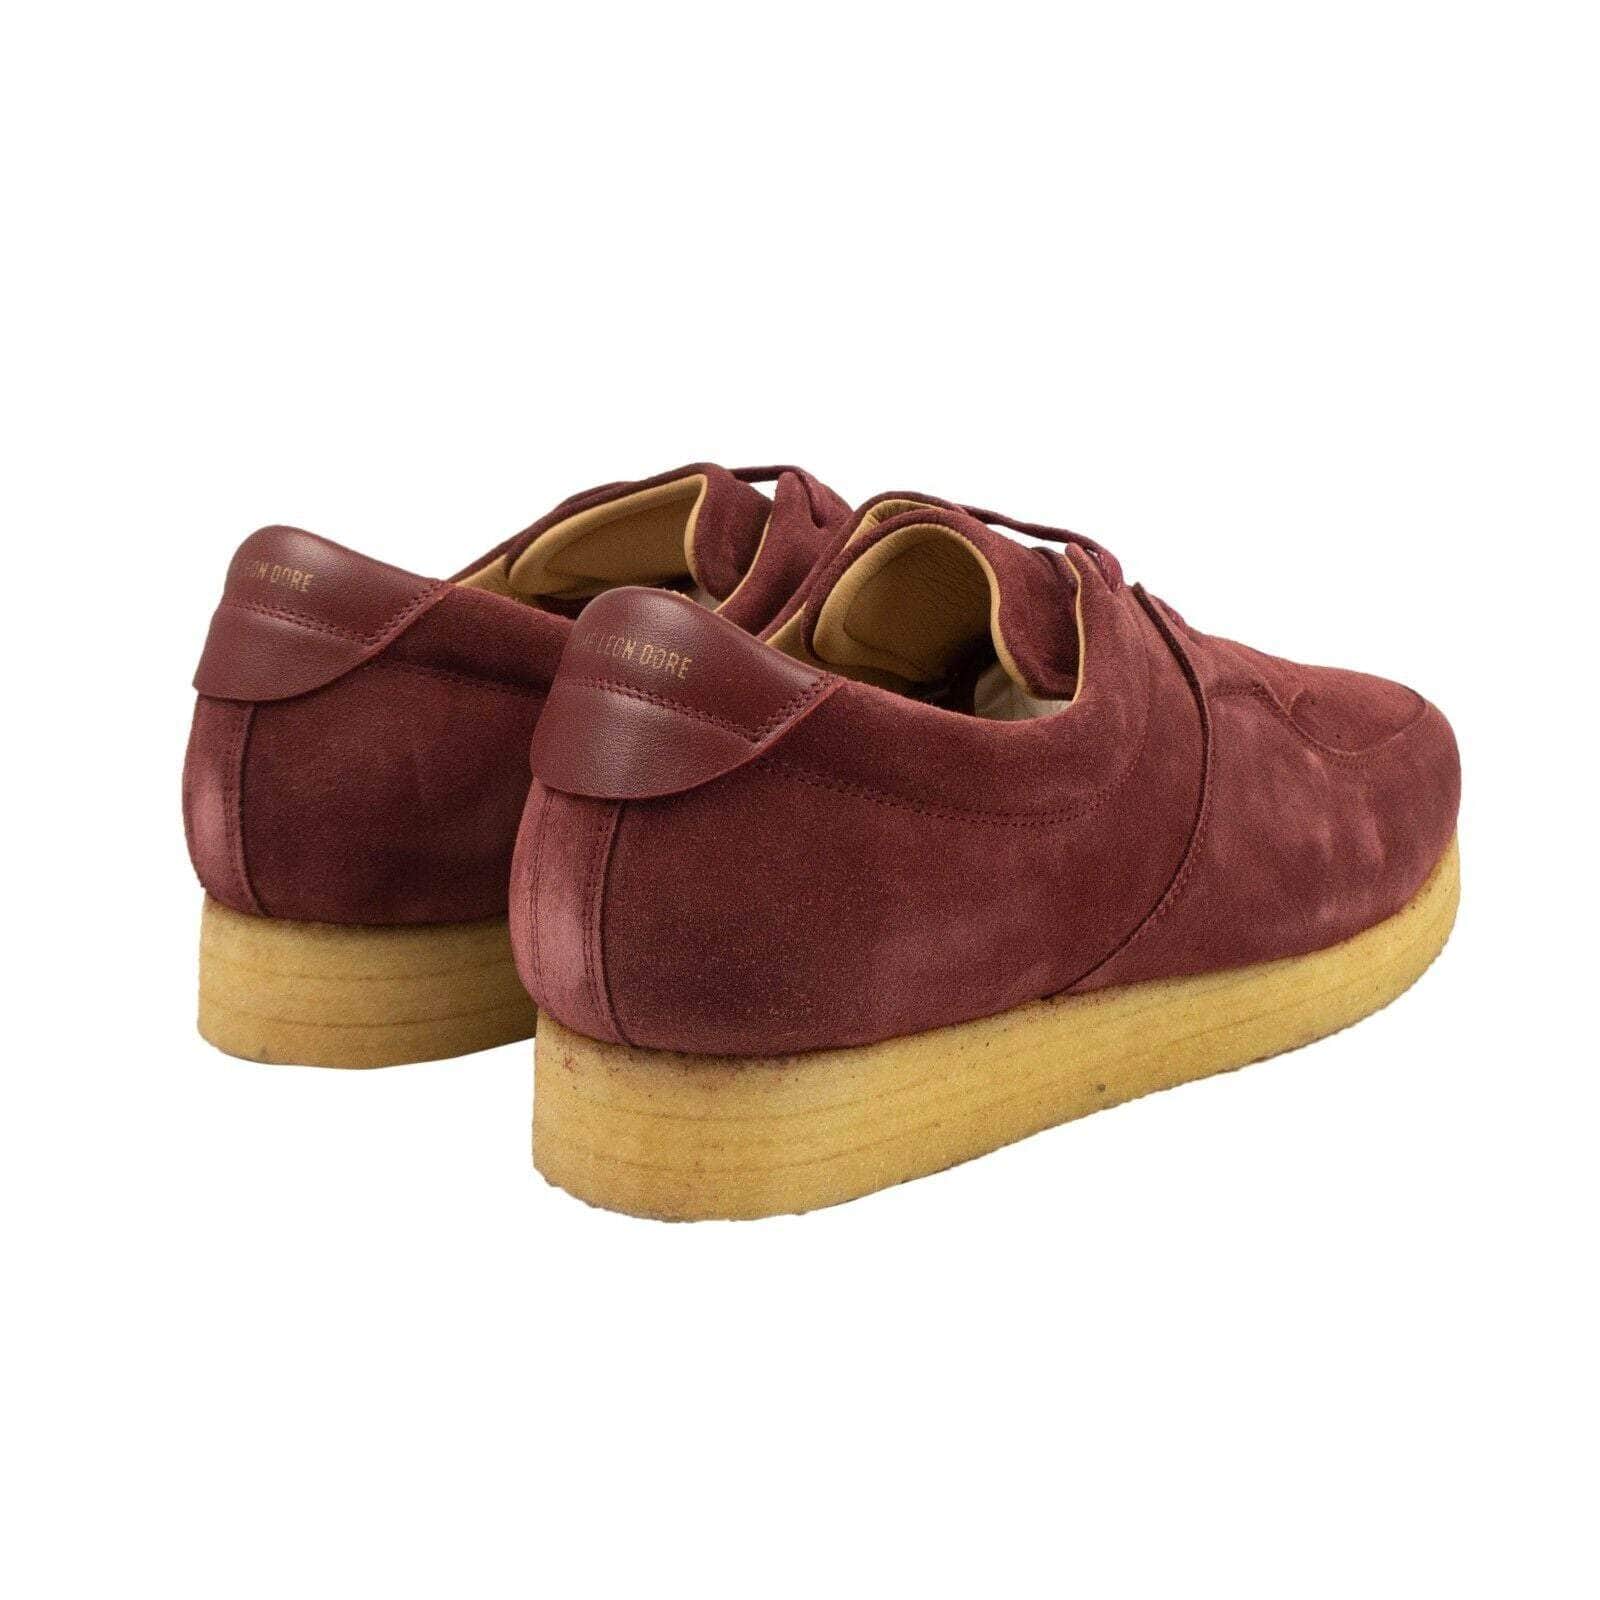 AIME LEON DORE aime-leon-dore, channelenable-all, chicmi, couponcollection, gender-mens, mens-oxfords-derby-shoes, mens-shoes, MixedApparel, size-9, under-250 9 Burgundy Q27 Wallabe Shoes 95-ALD-2002/9 95-ALD-2002/9